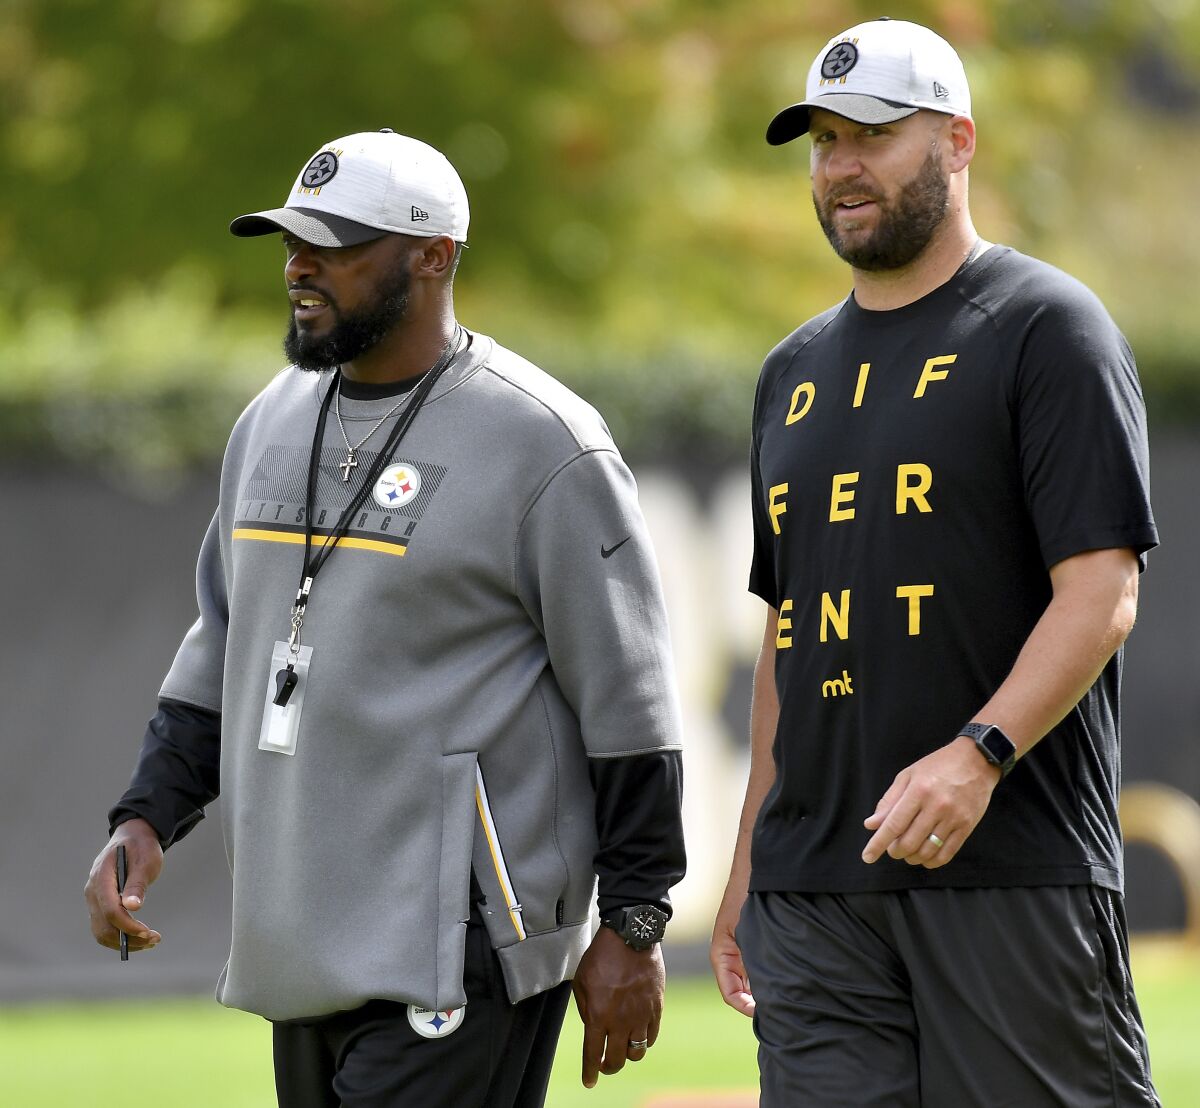 urgh Steelers head coach Mike Tomlin walks with quarterback Ben Roethlisberger during NFL football practice, Wednesday, Sept. 22, 2021, at UPMC Rooney Sports Complex in Pittsburgh. (Matt Freed/Pittsburgh Post-Gazette via AP)